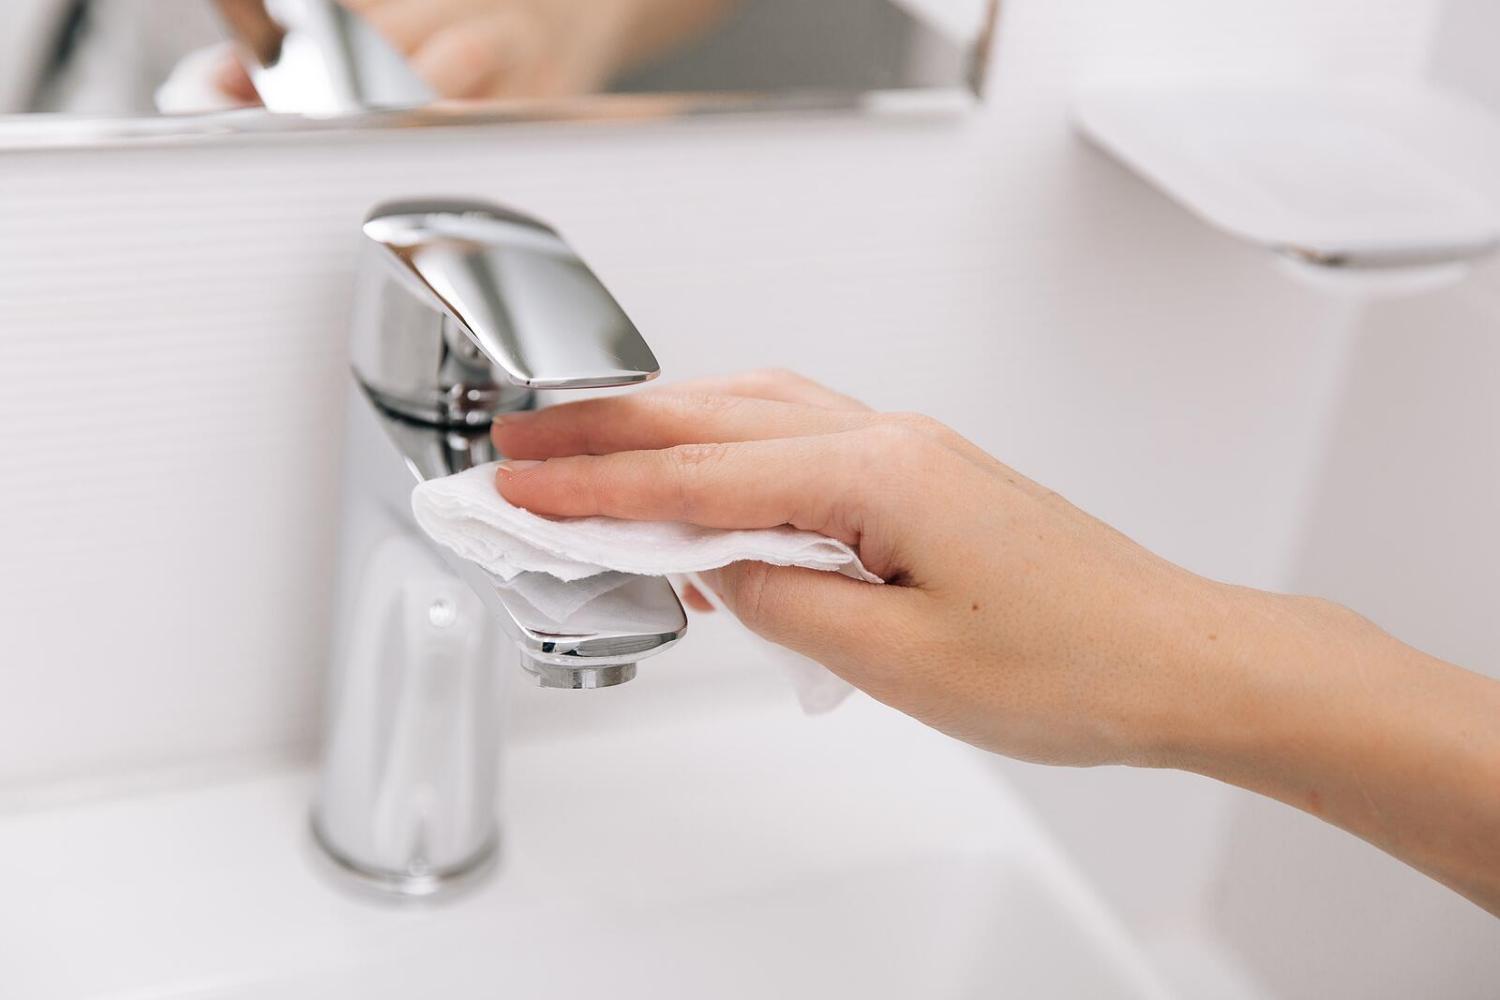 Banishing the Buildup: How To Remove Calcium Buildup On Faucet - Blog - 1